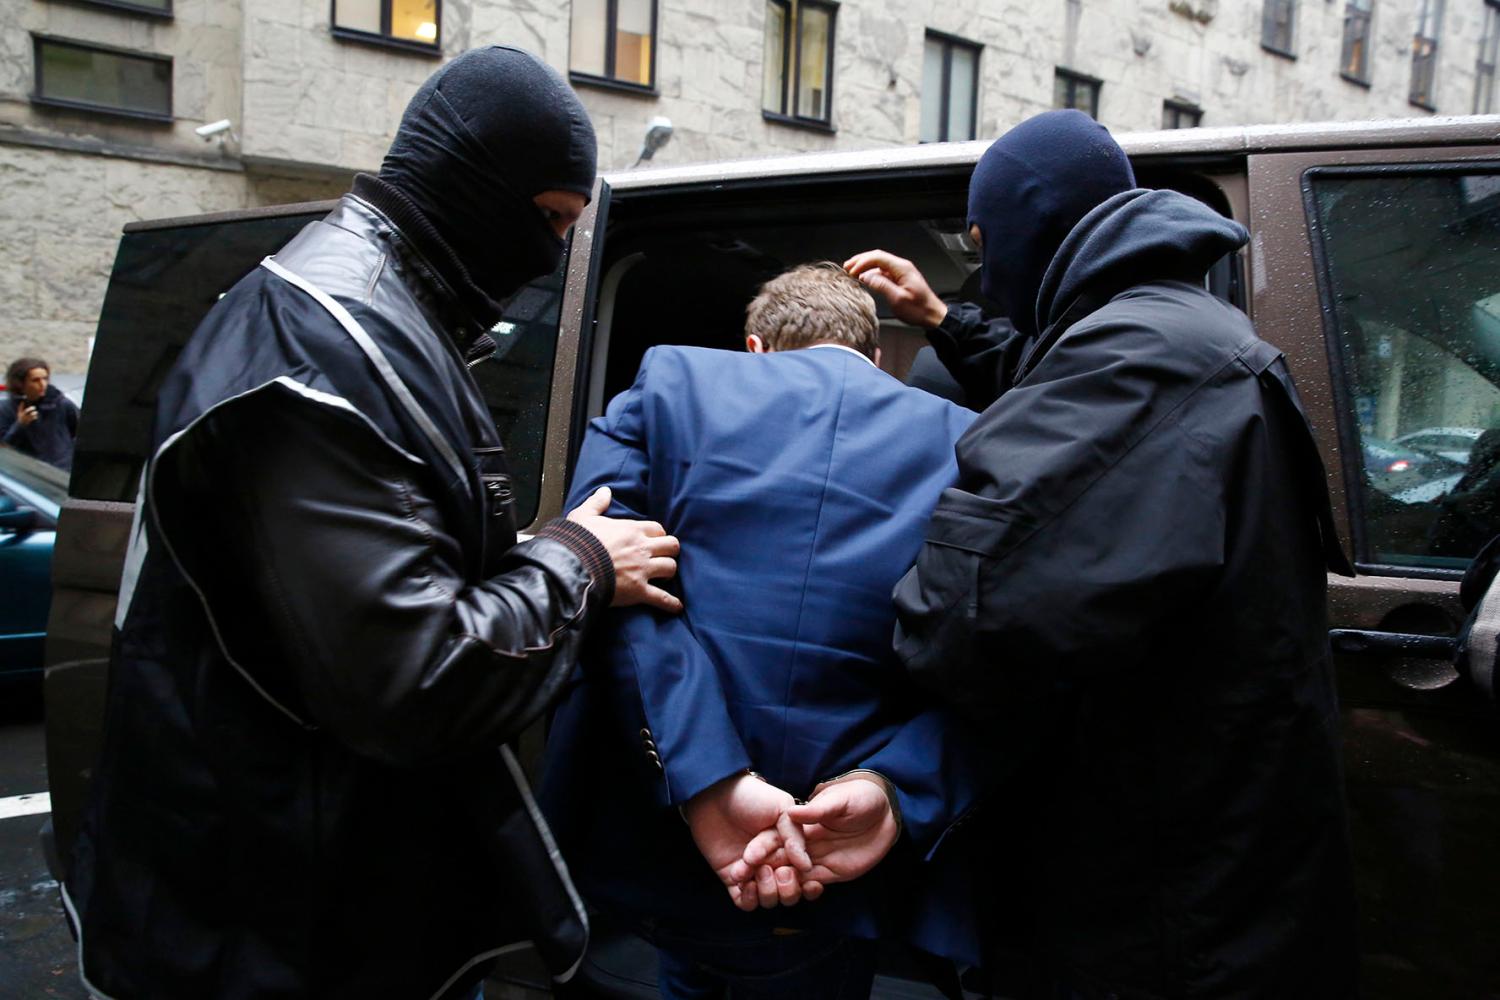 The Internal Security Agency (ABW) officers escort a man arrested on suspicion of spying in front of the district court in Warsaw October 17, 2014.